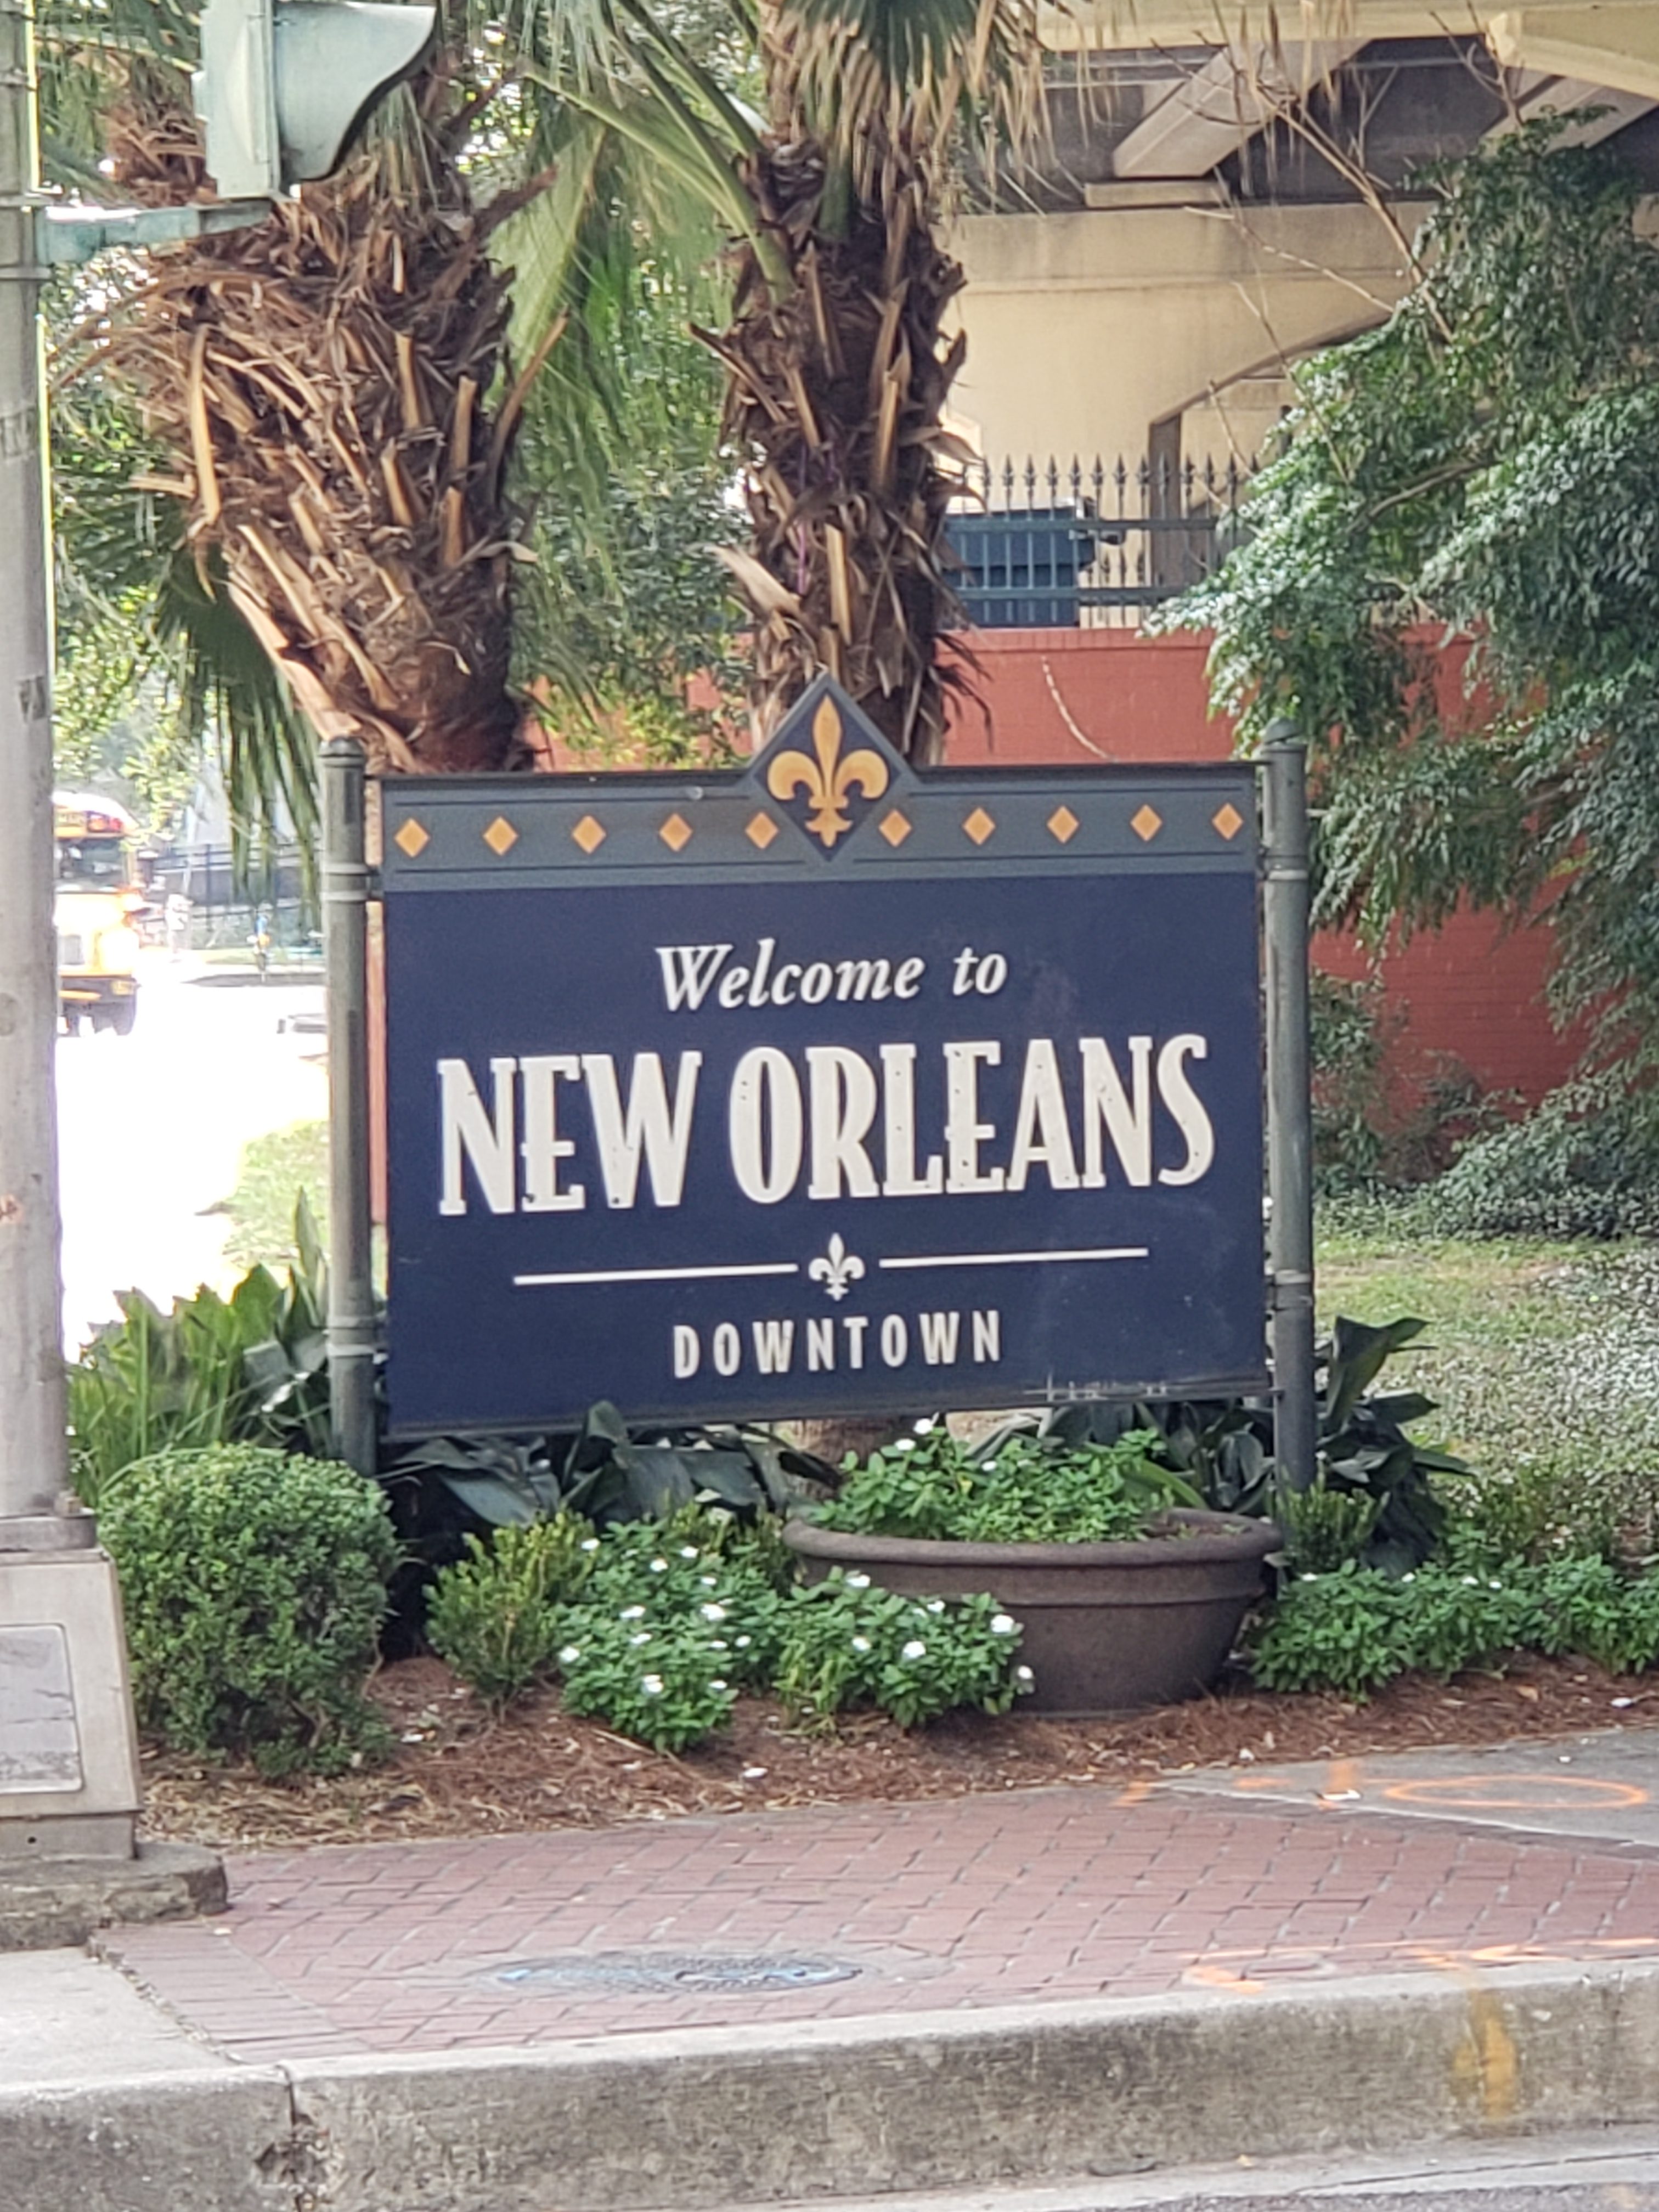 20190930 105312 e1571191721292 - New Orleans: Tourist Attractions